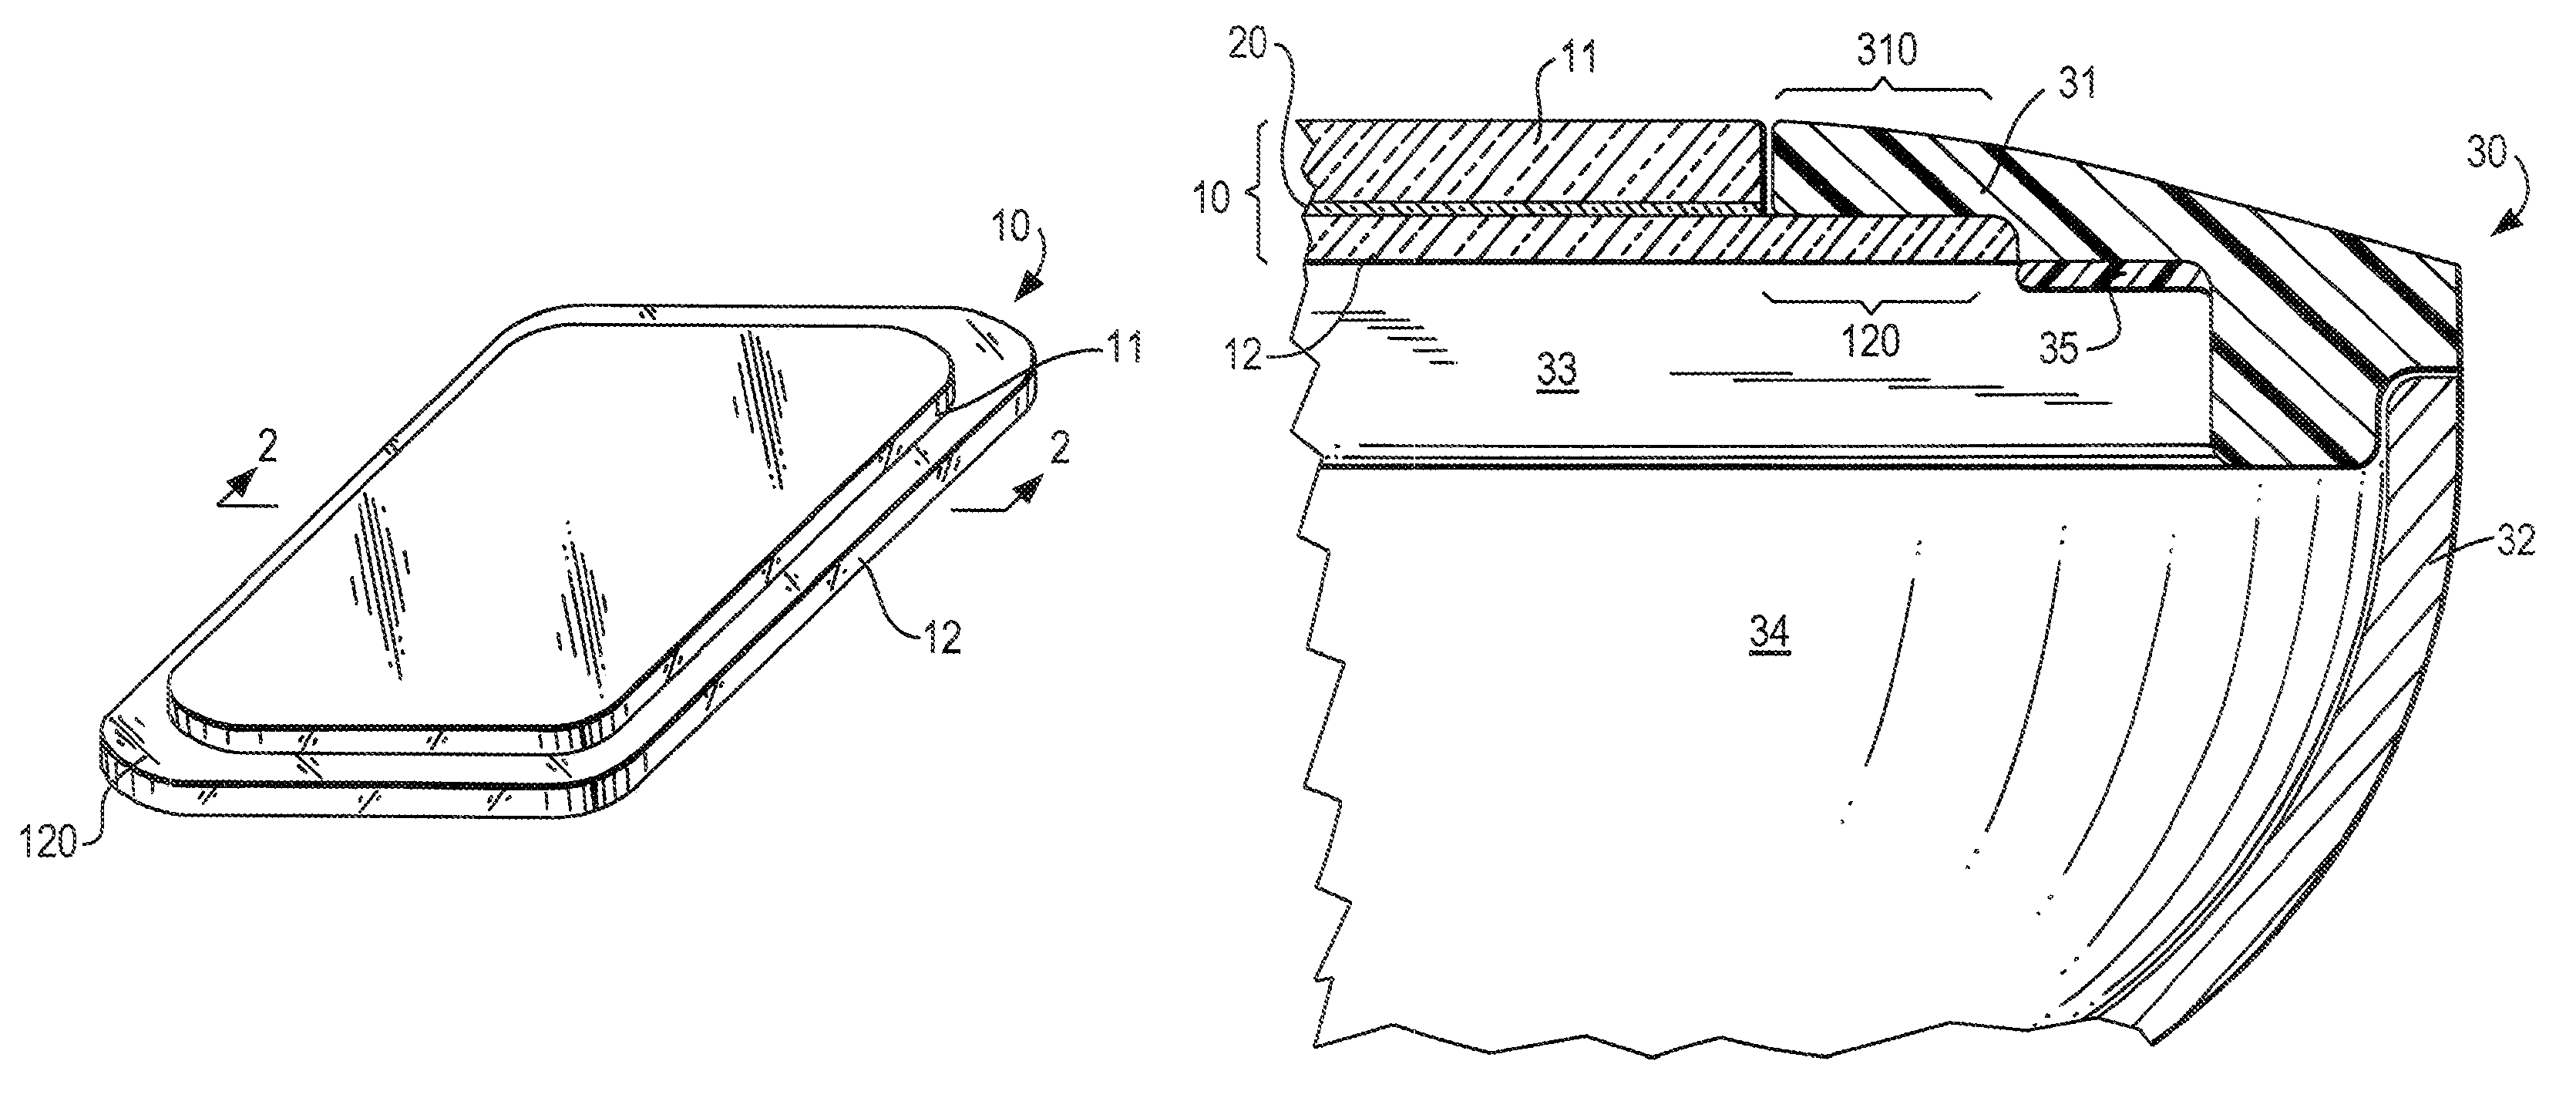 Laminated display window and device incorporating same